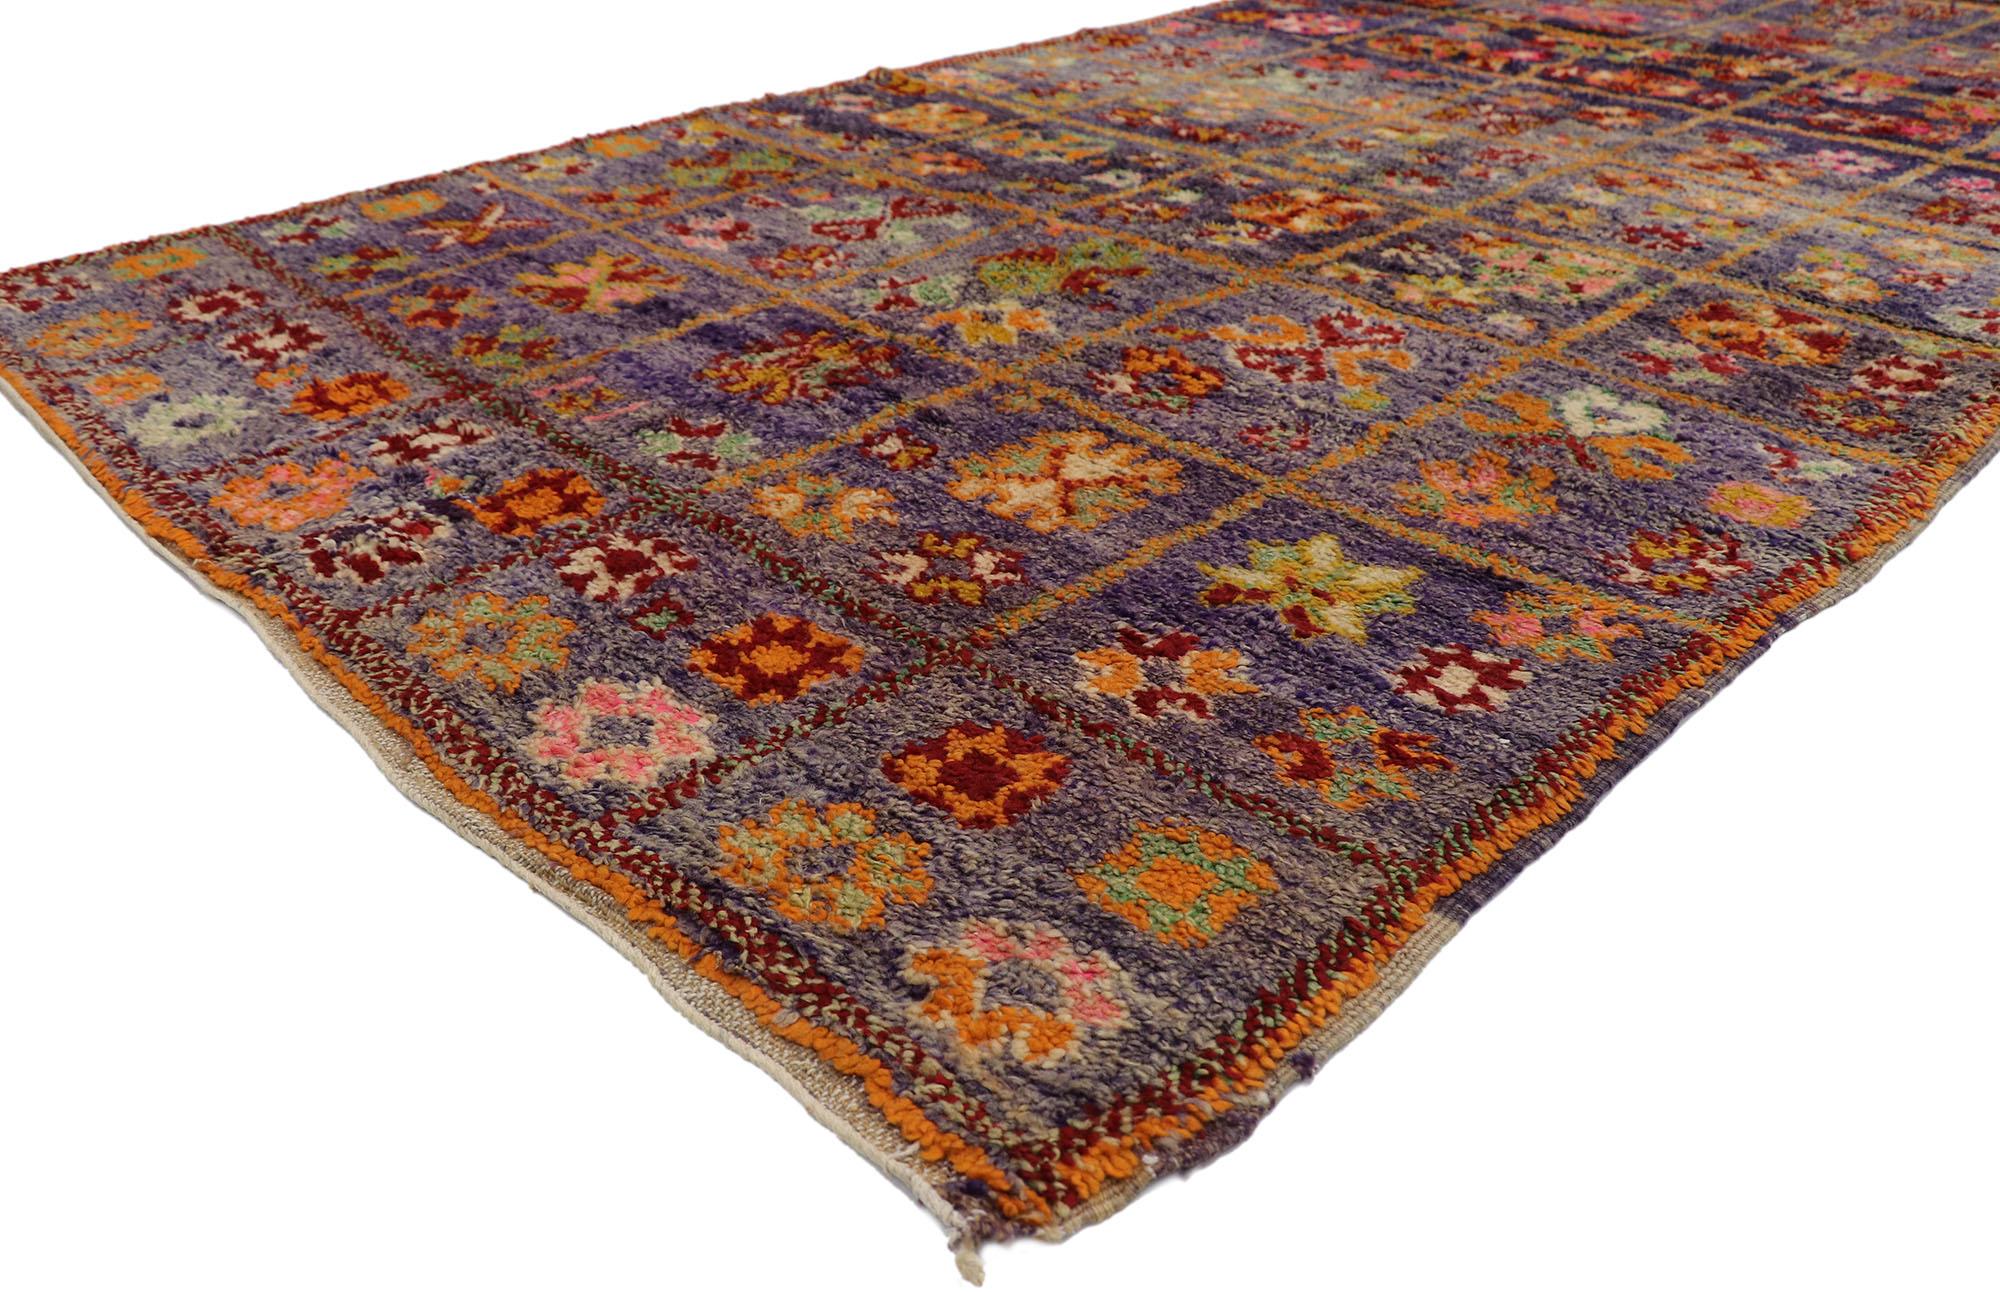 21240 vintage Berber Boujad Moroccan rug with Bohemian style 05'03 x 09'03. Showcasing a bold expressive design, incredible detail and texture, this hand knotted wool vintage Berber Boujad Moroccan rug is a captivating vision of woven beauty. The